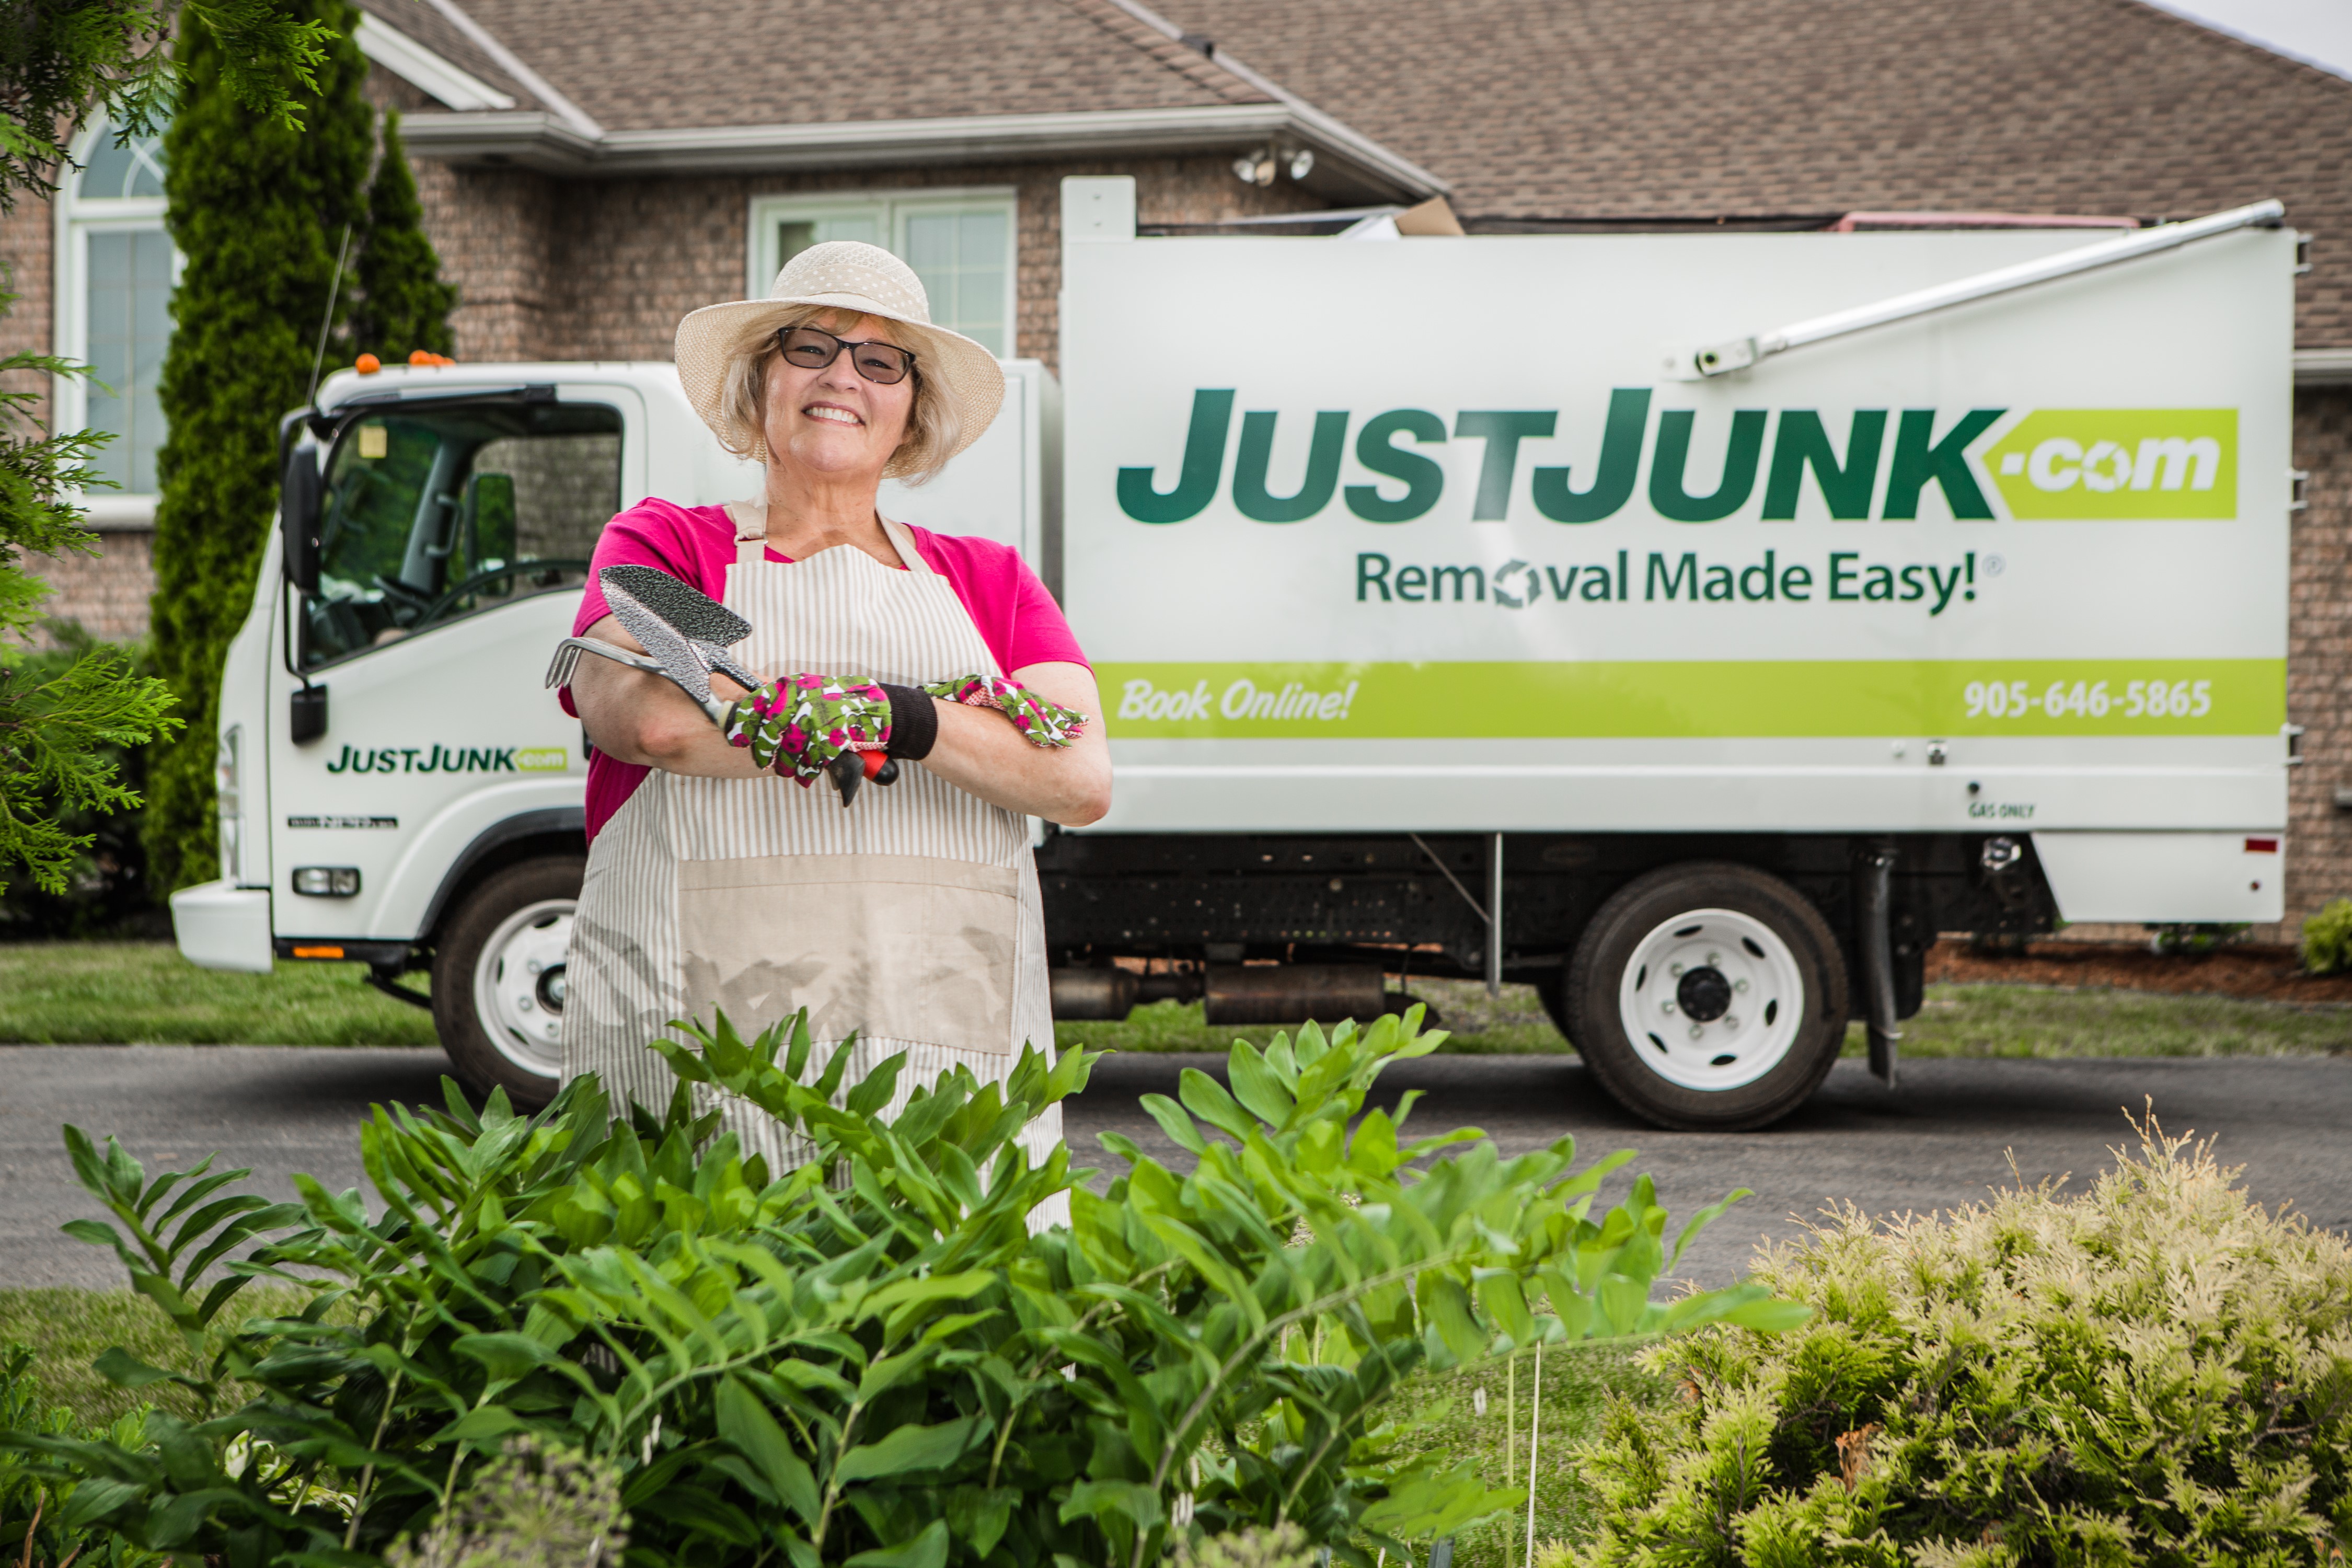 Just Junk Service - Junk removal and Downsizing Calgary 